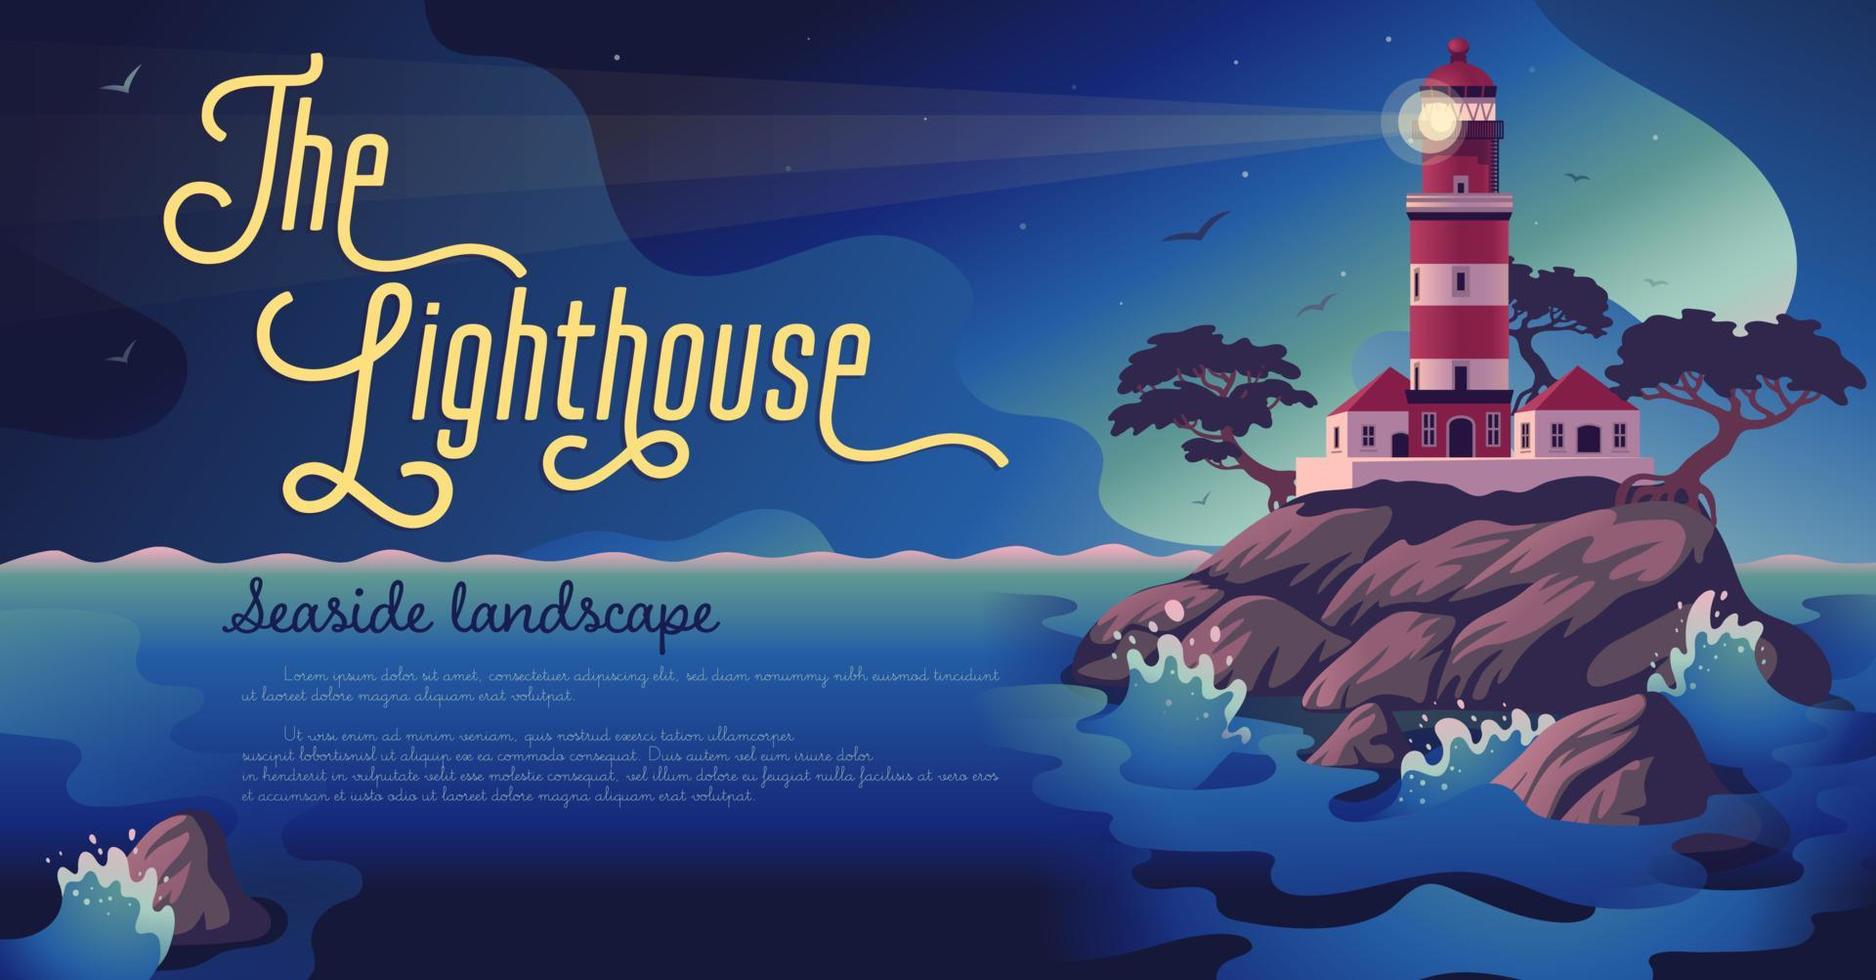 Lighthouse - vector landscape. Sea landscape with beacon on the cliff. Vector horizontal illustration in flat cartoon style.